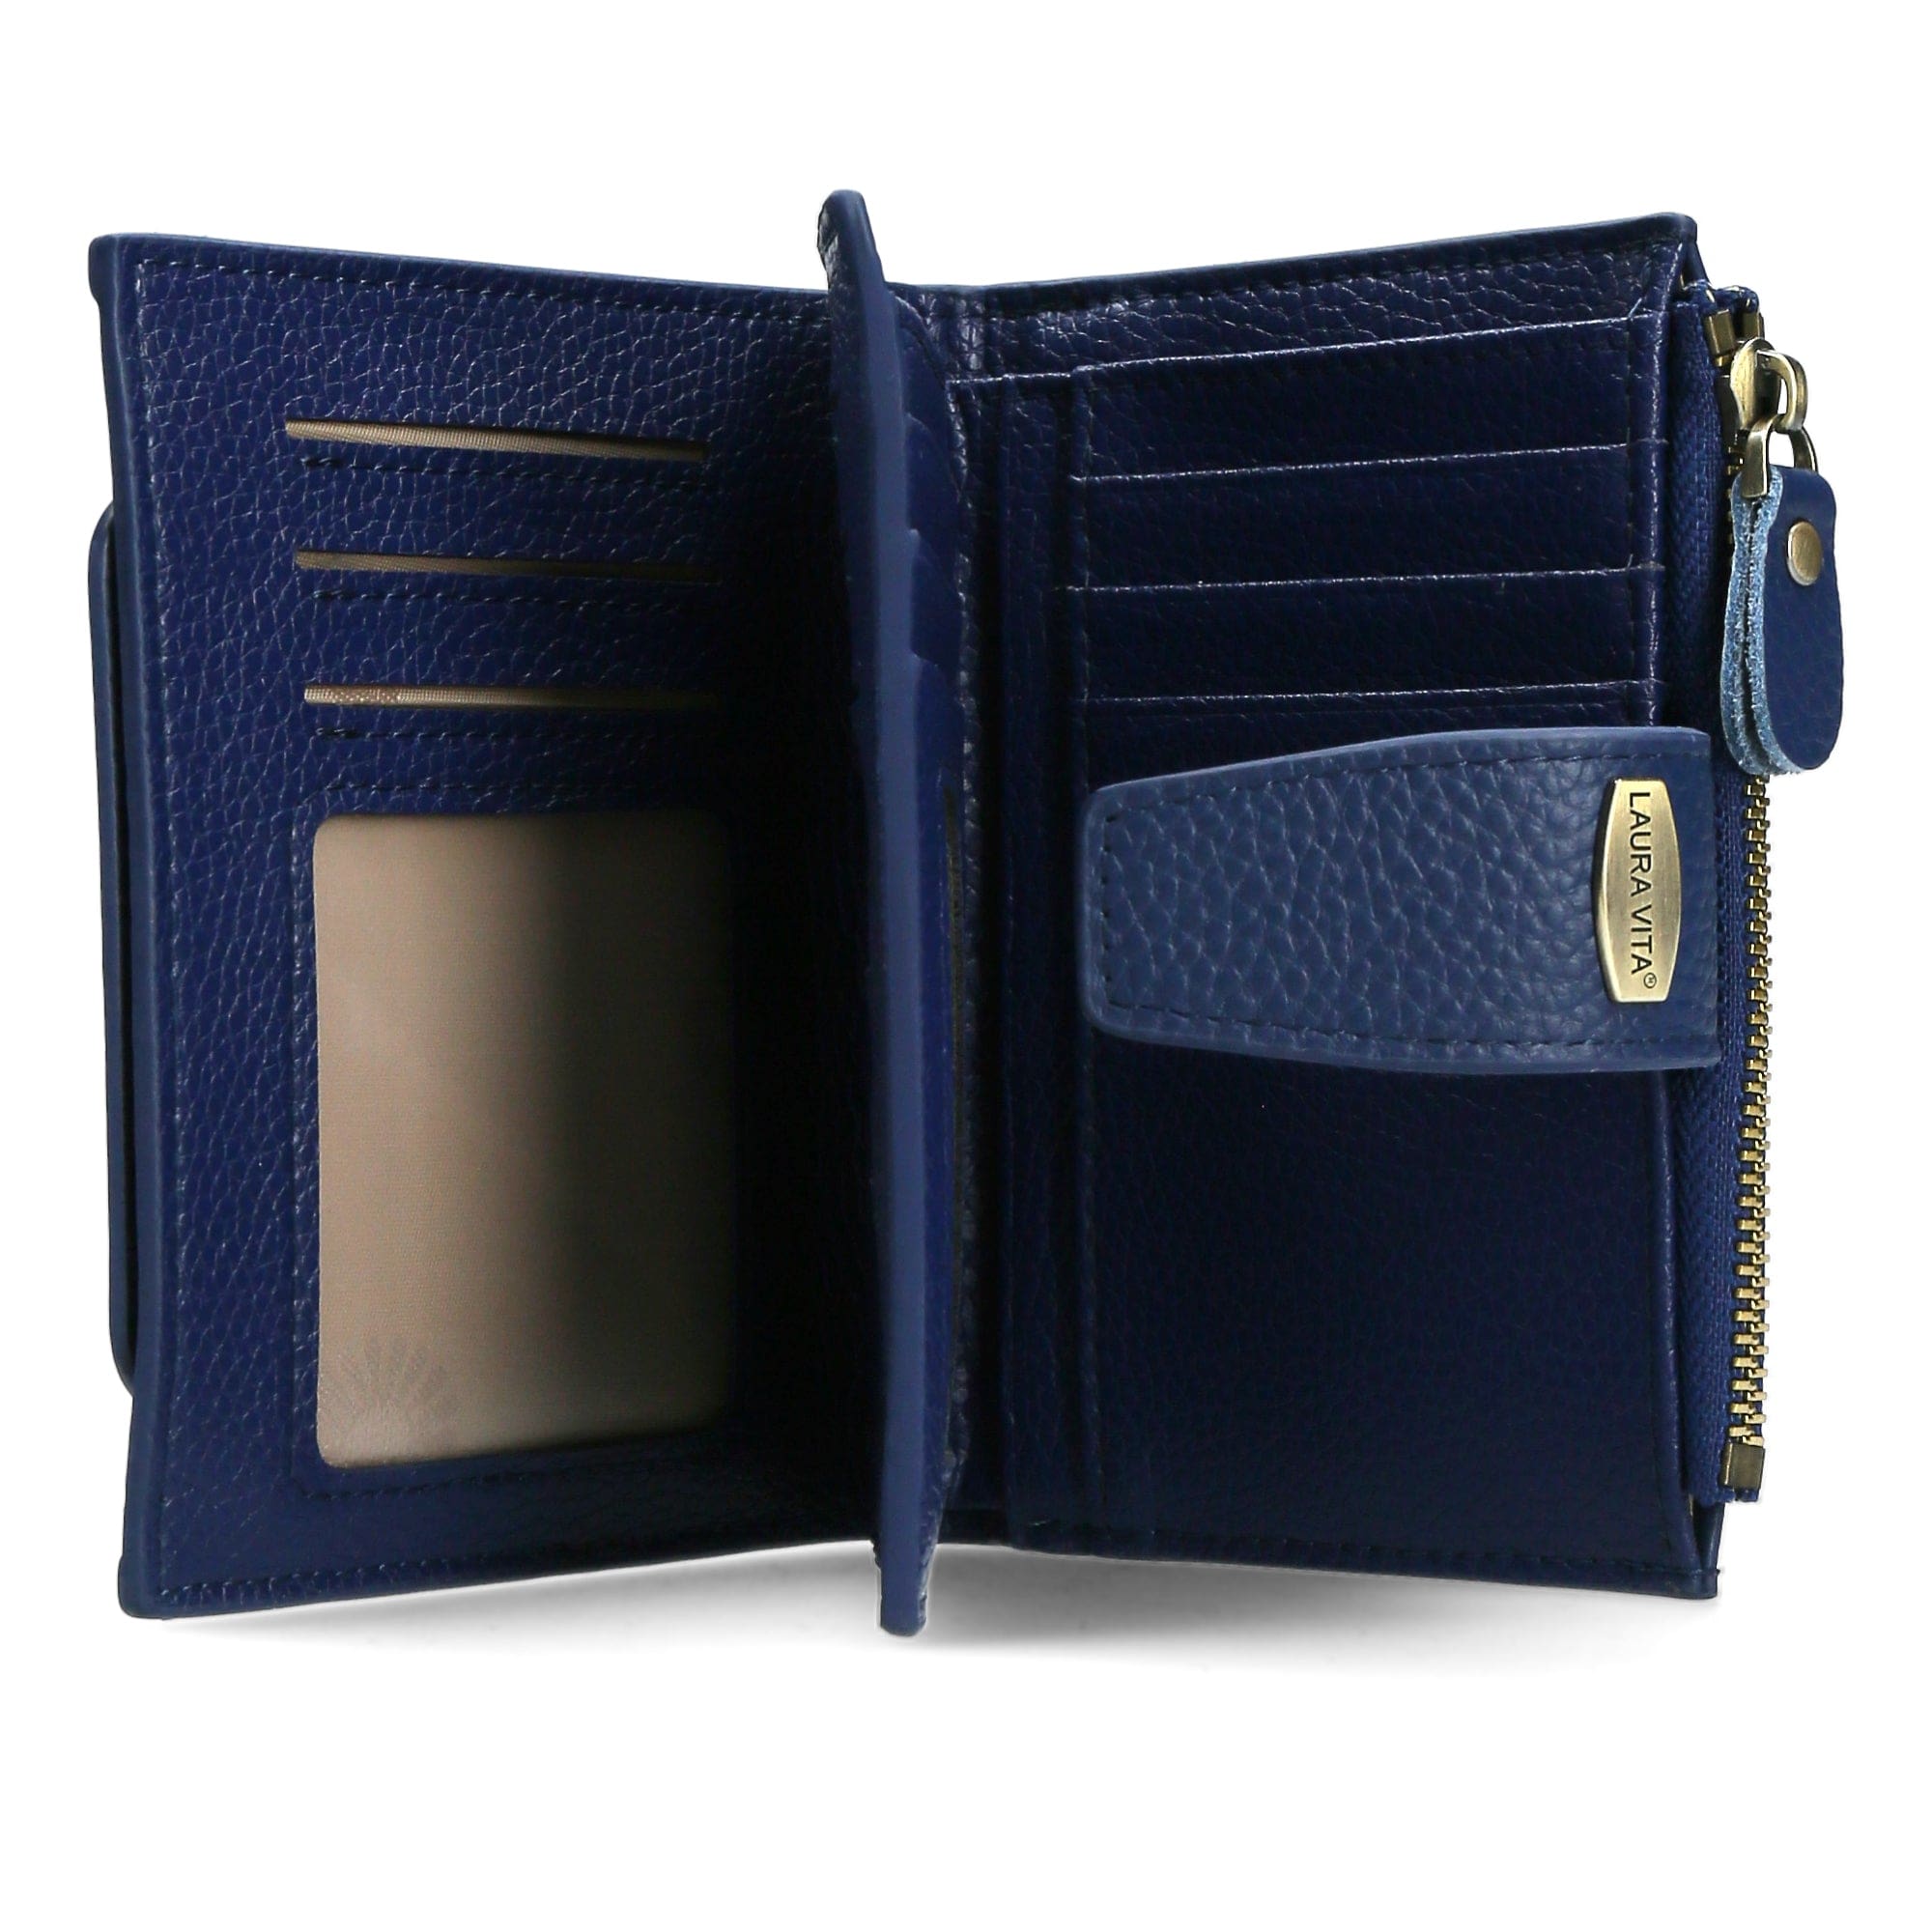 Felicia wallet - Small leather goods